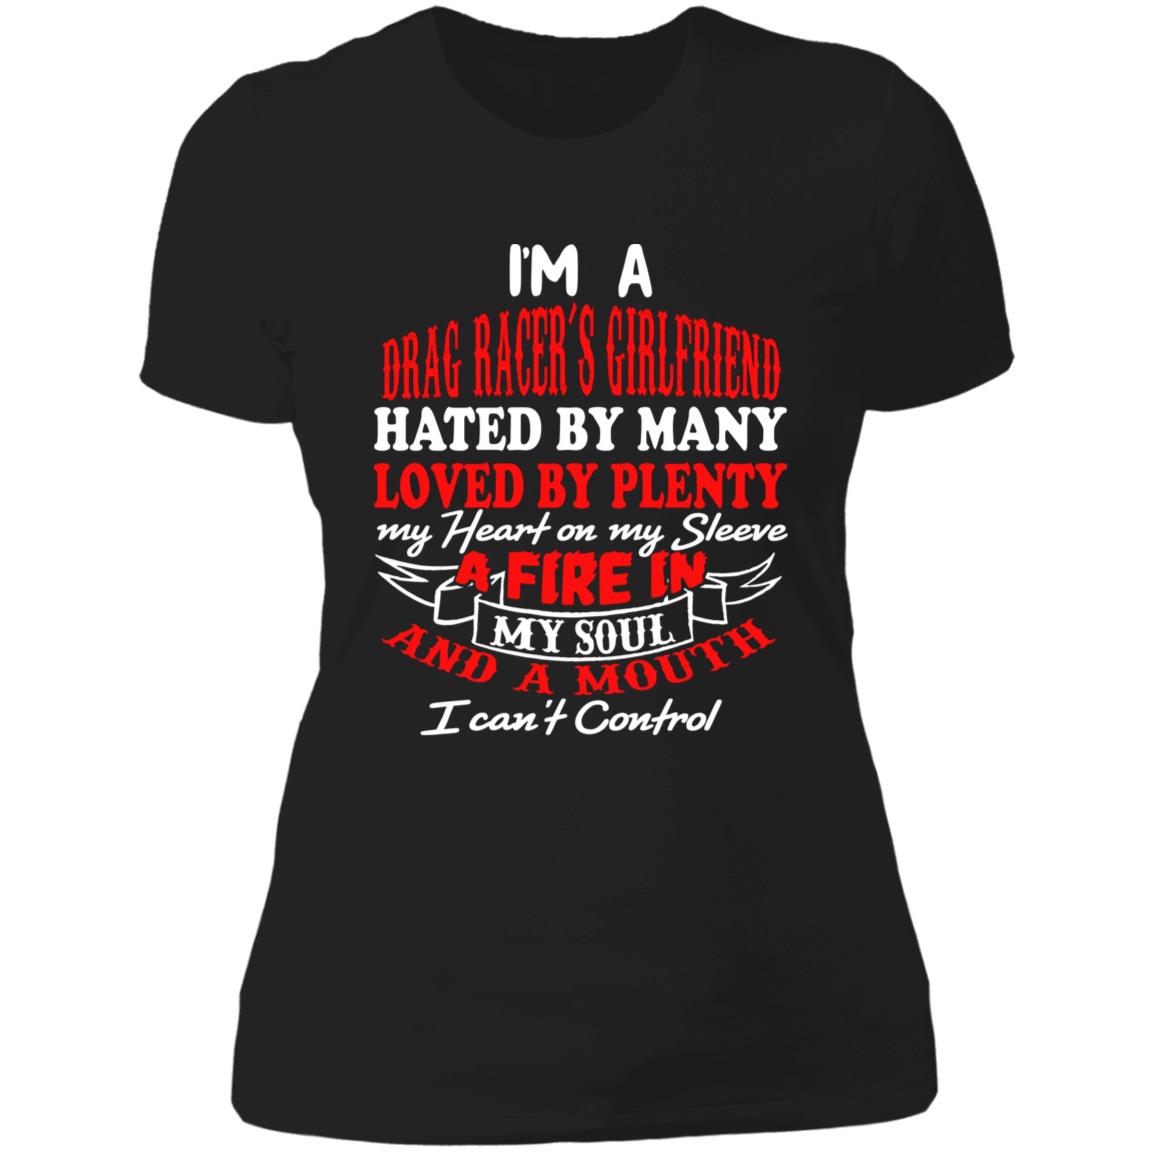 I'm A Drag Racer's Girlfriend Hated By Many Loved By Plenty Ladies' Boyfriend T-Shirt